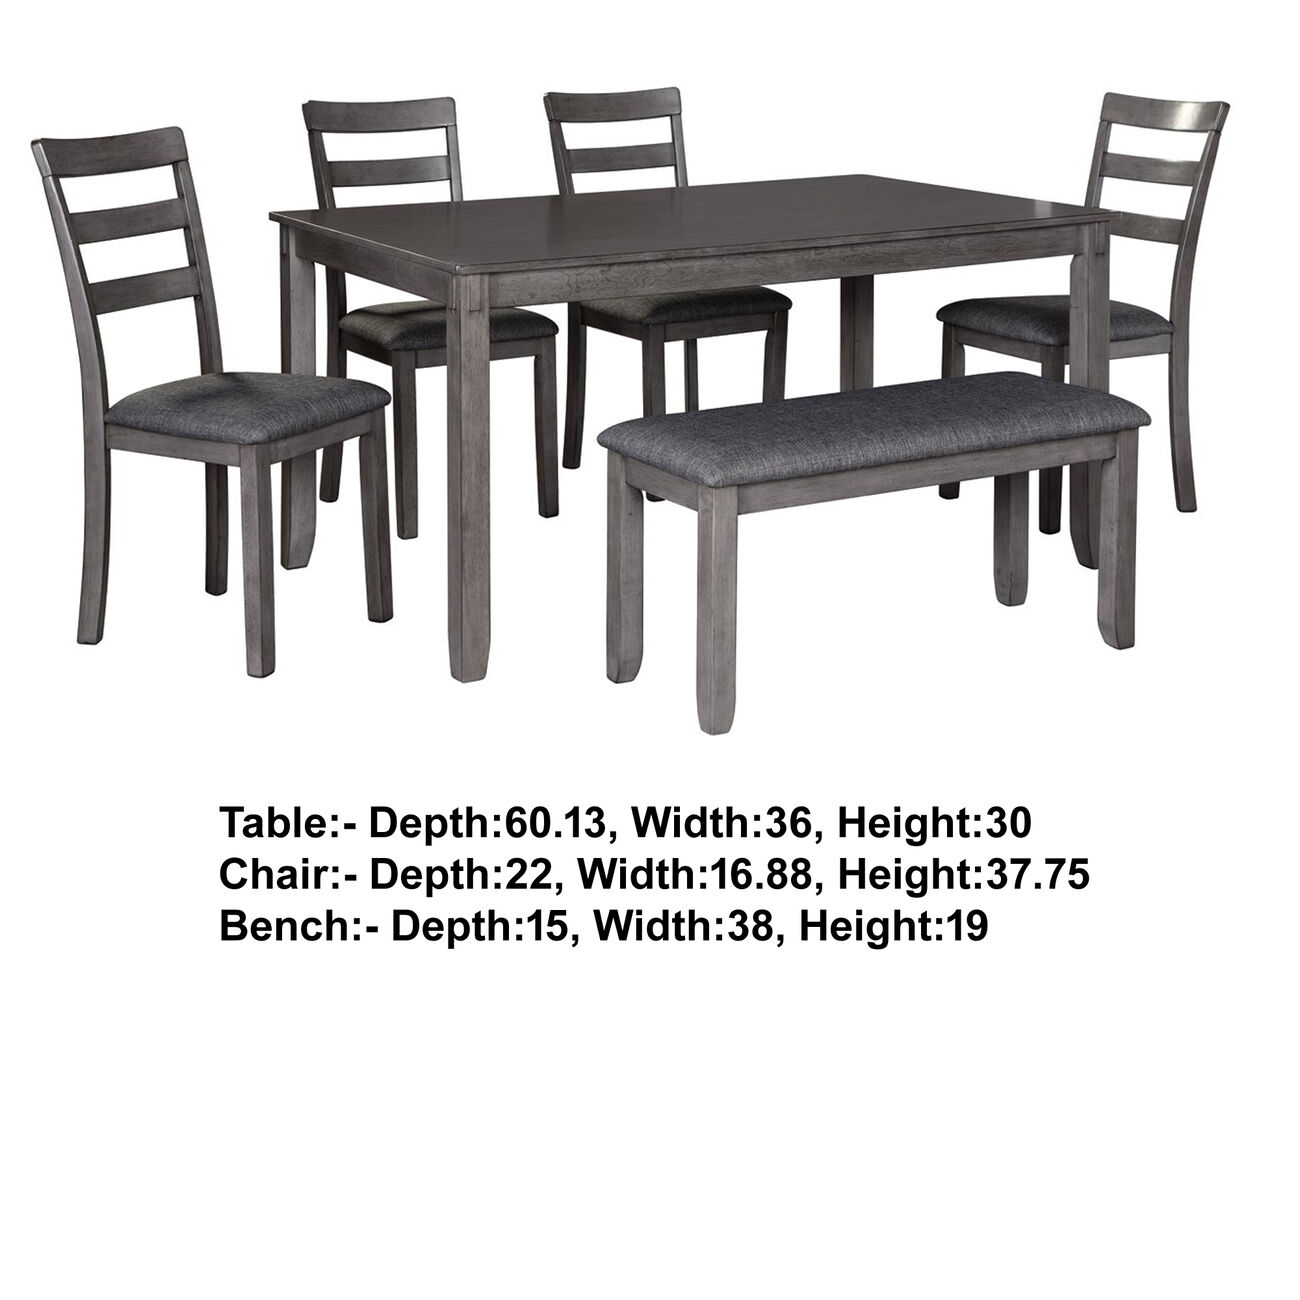 6 Piece Wooden Dining Table Set with Padded Chairs and Table, Gray